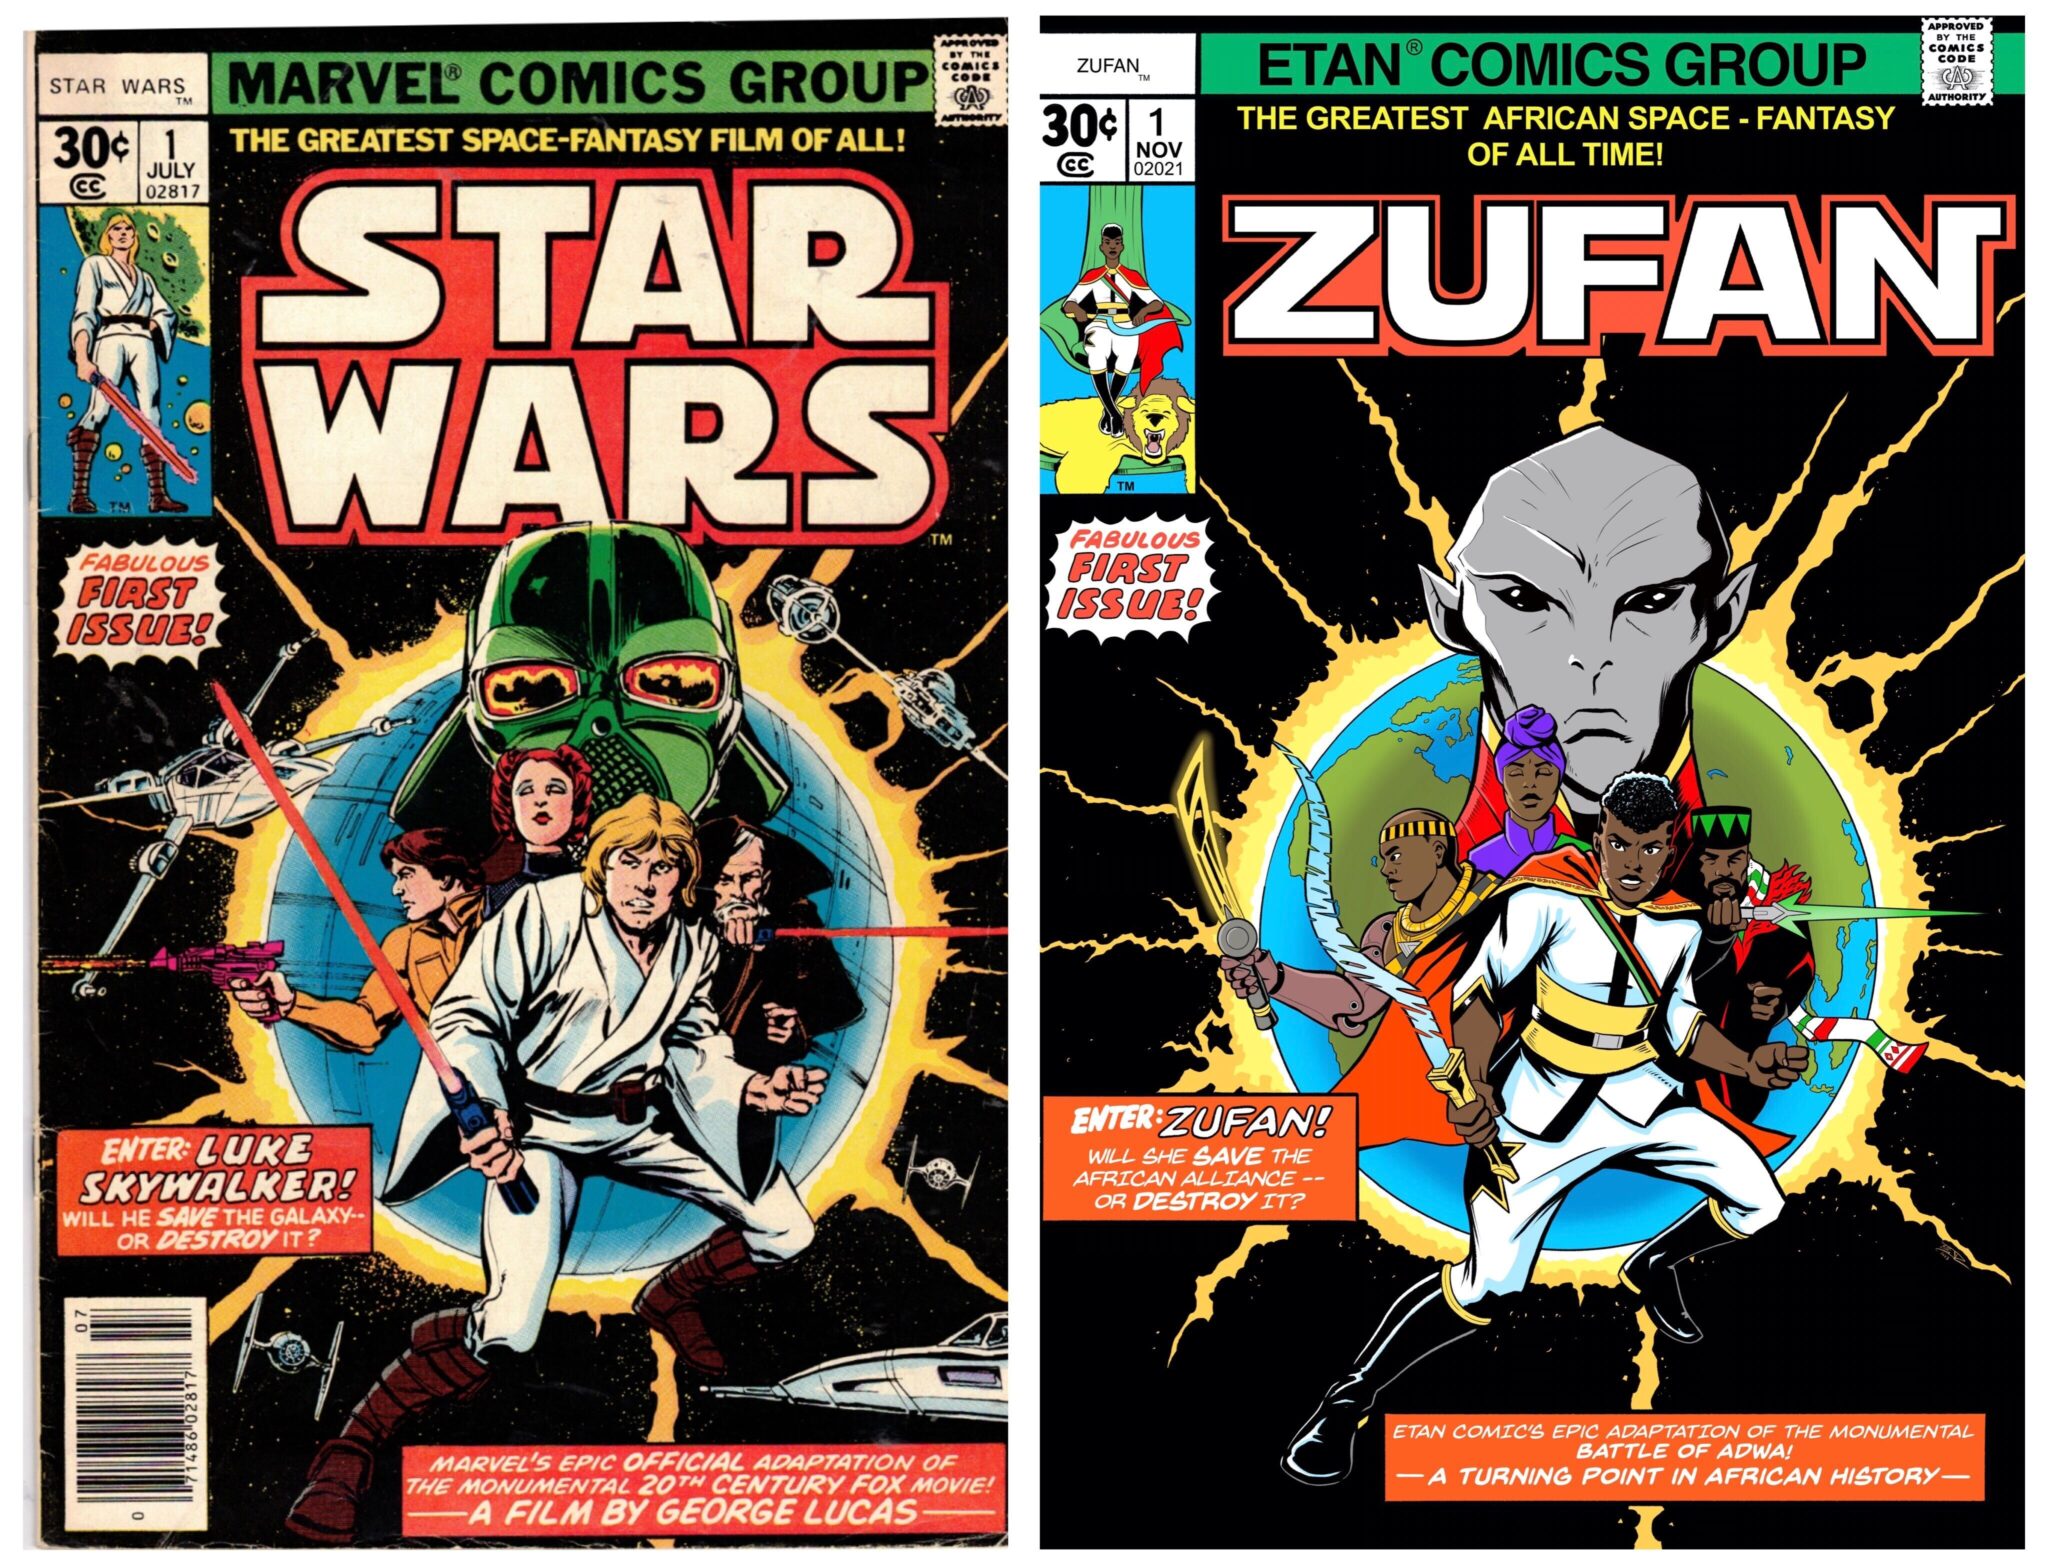 You are currently viewing ZUFAN Variant Homage Covers “STAR WARS #1” | Etan Comics